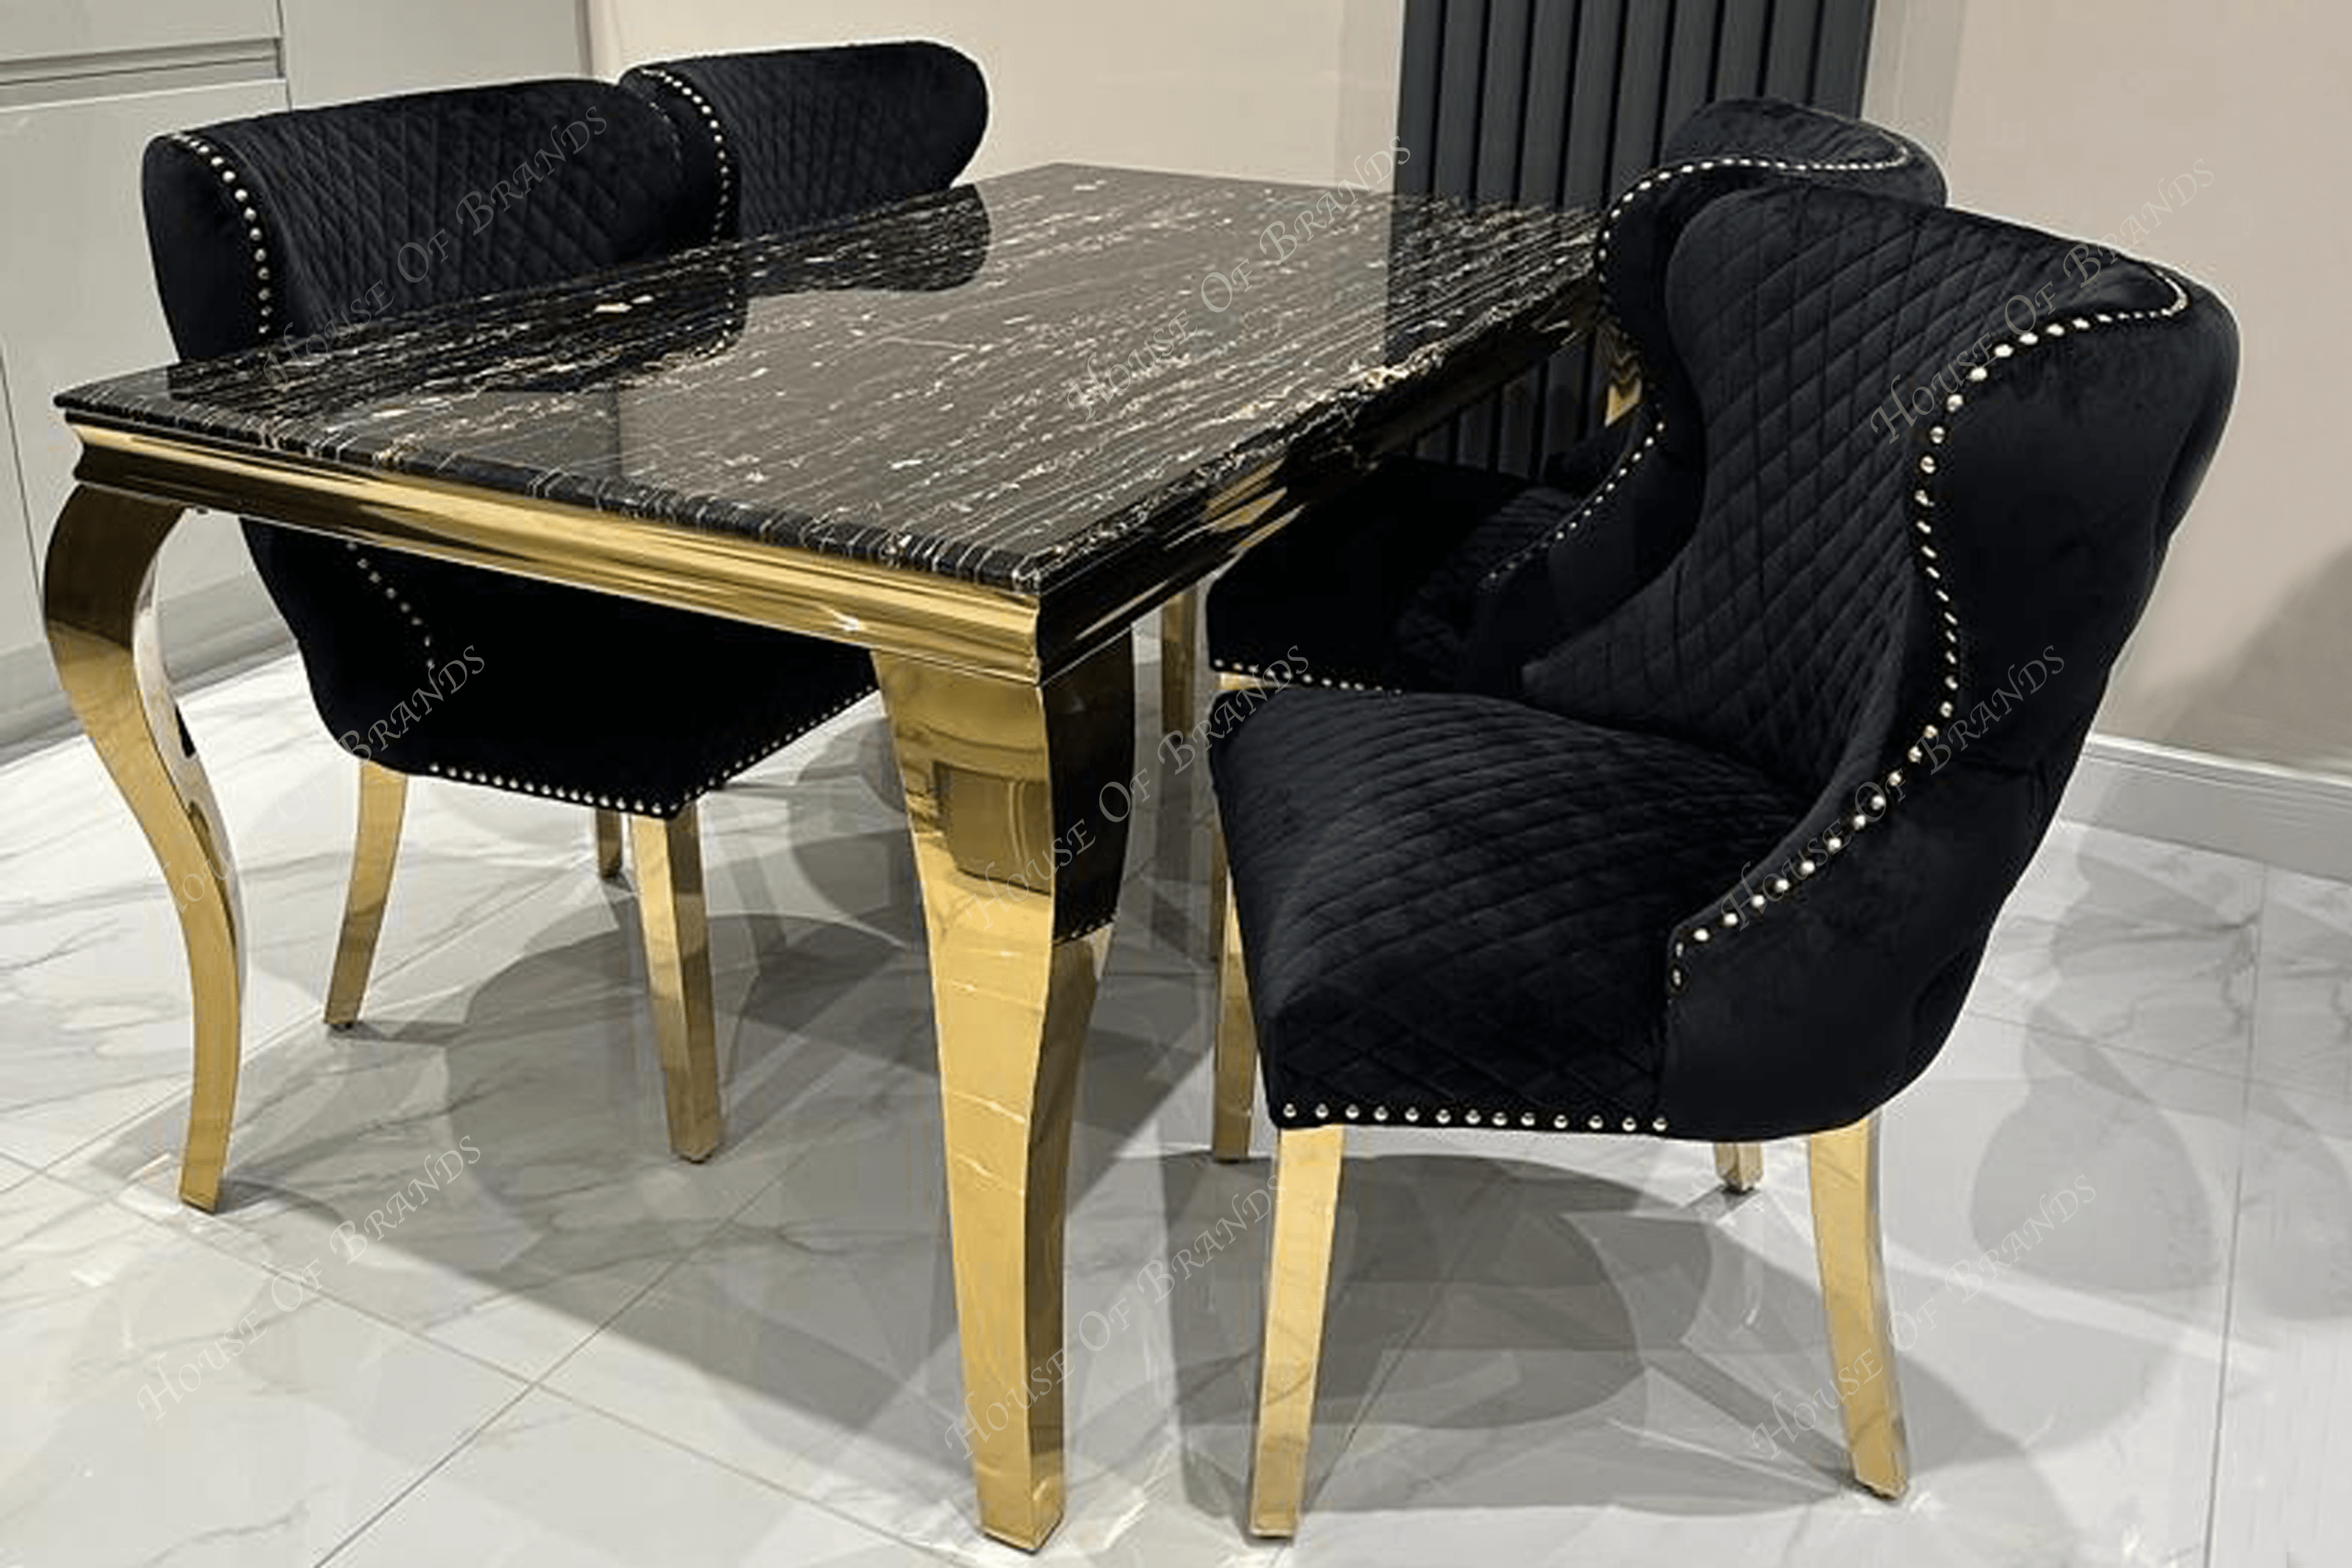 Black & Gold Rome Table with Black & Gold Ring Valencia Chairs - House Of Brands